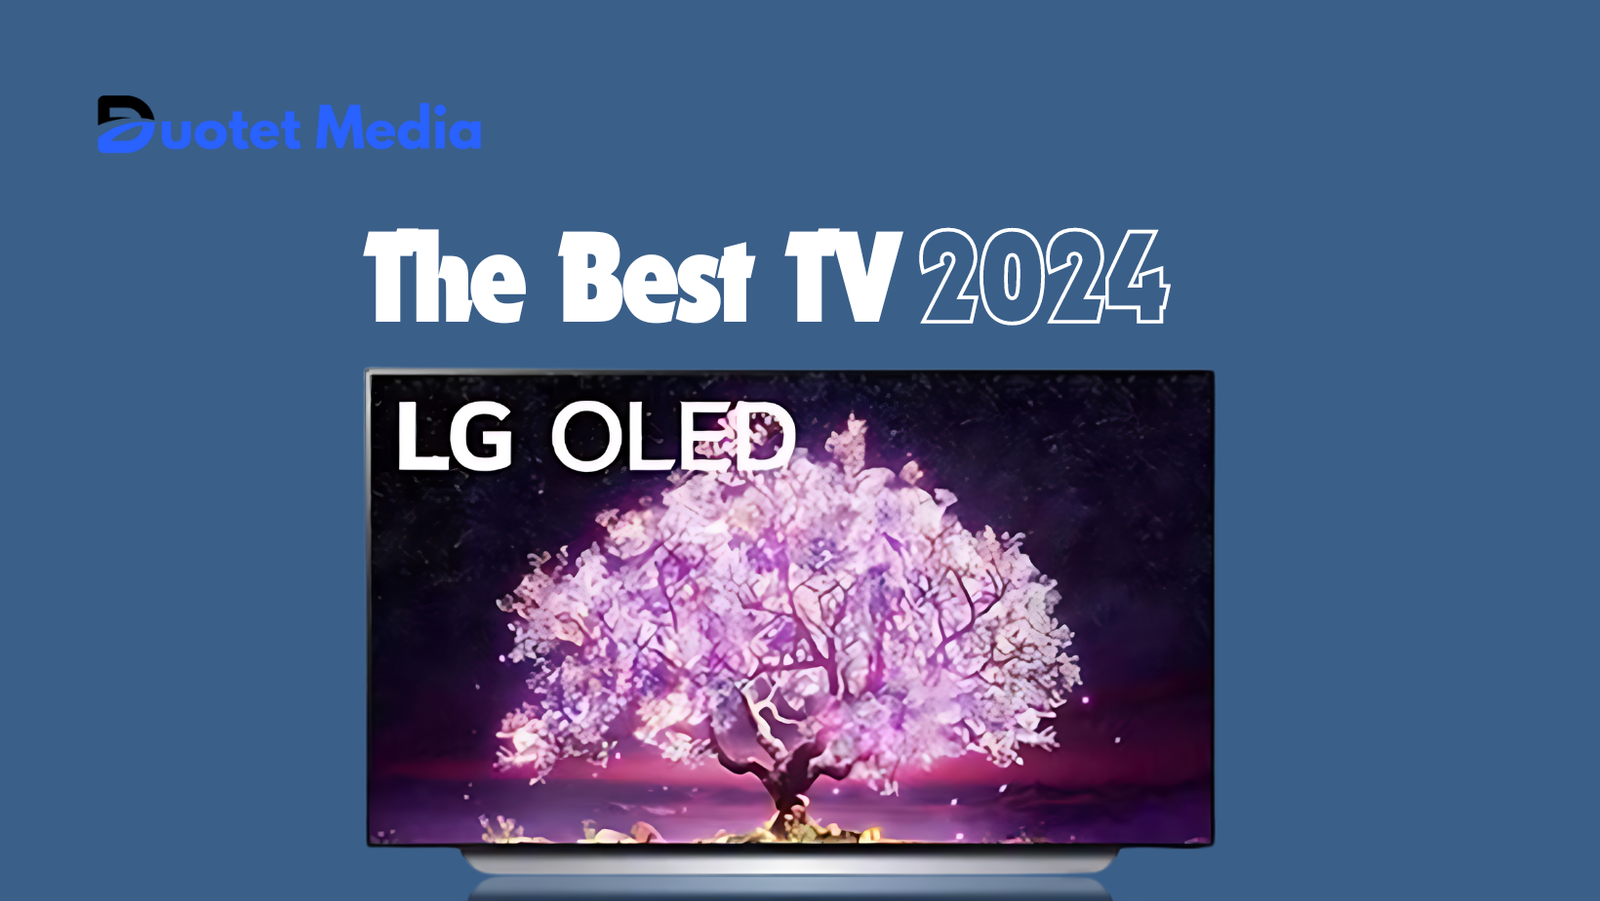 The Best TV 2024